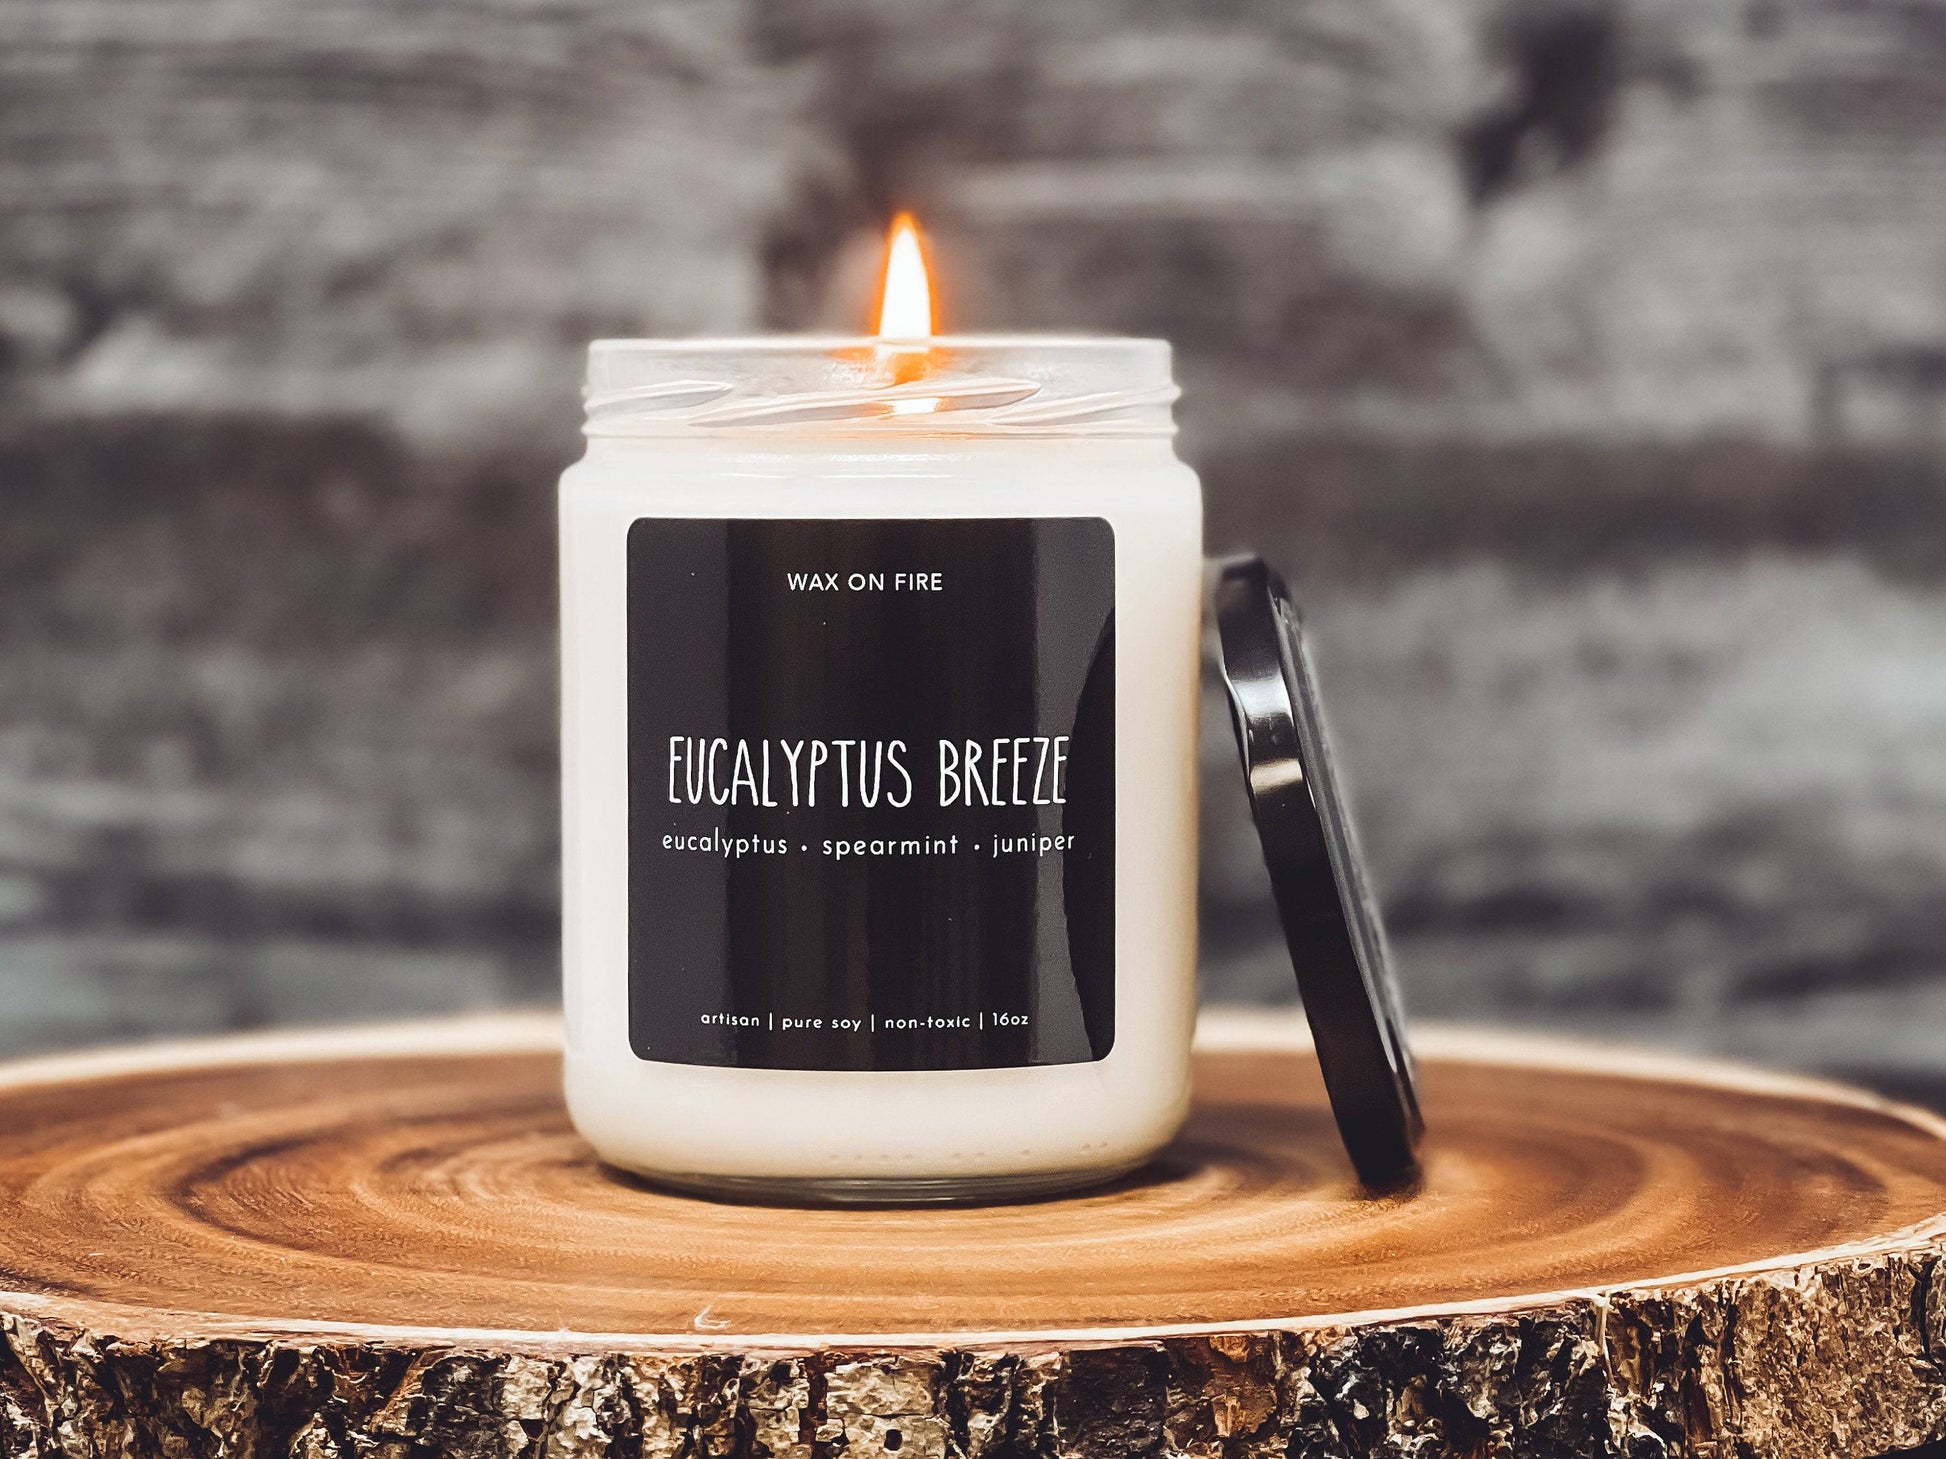 Eucalyptus Breeze | Non-Toxic Soy Candle - Wax On Fire